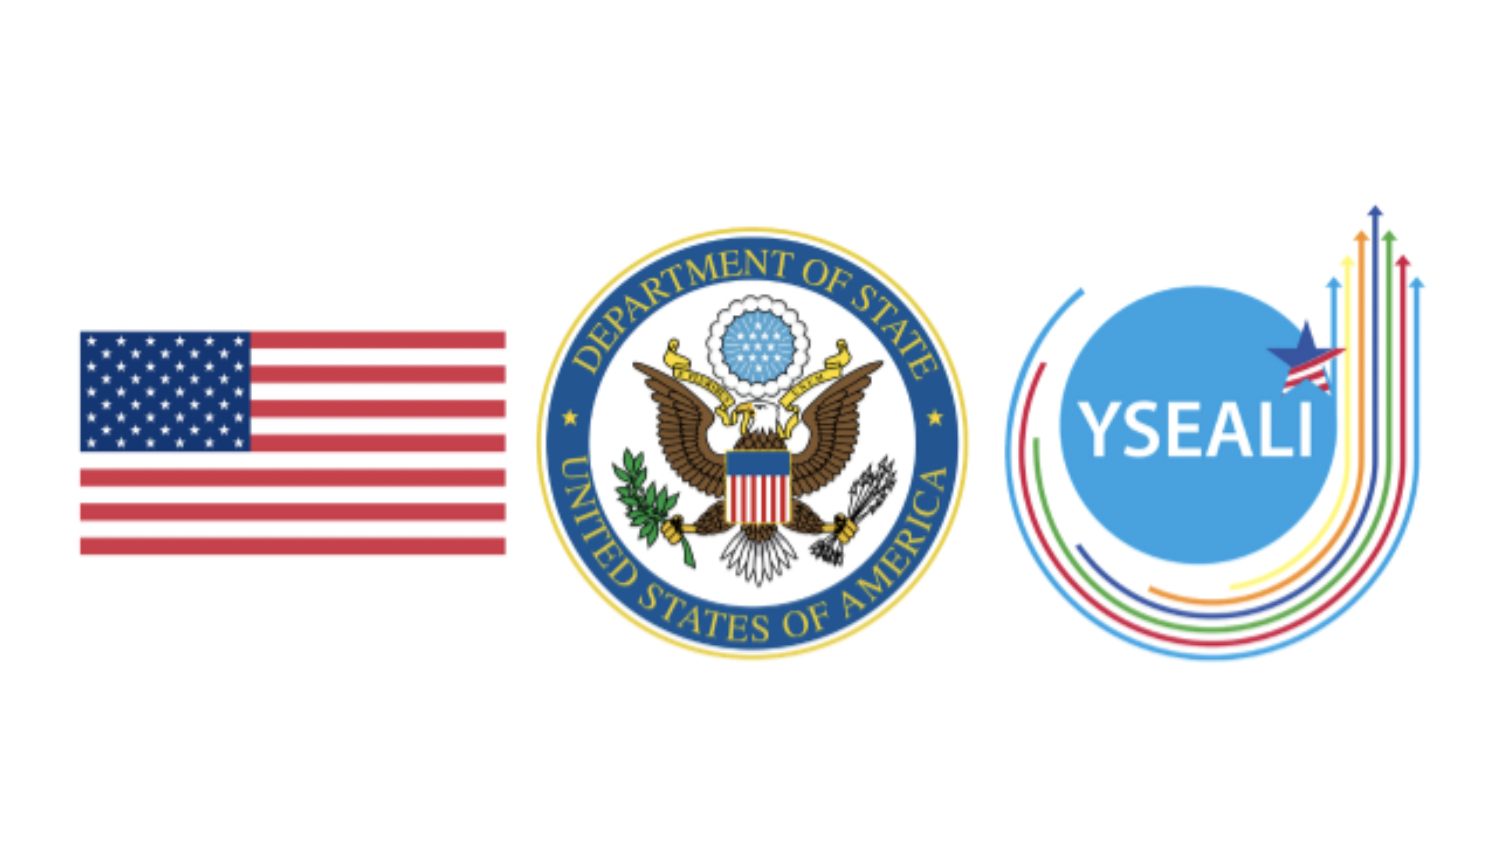 Call for Applications for The 2022 YSEALI Professional Fellows Program